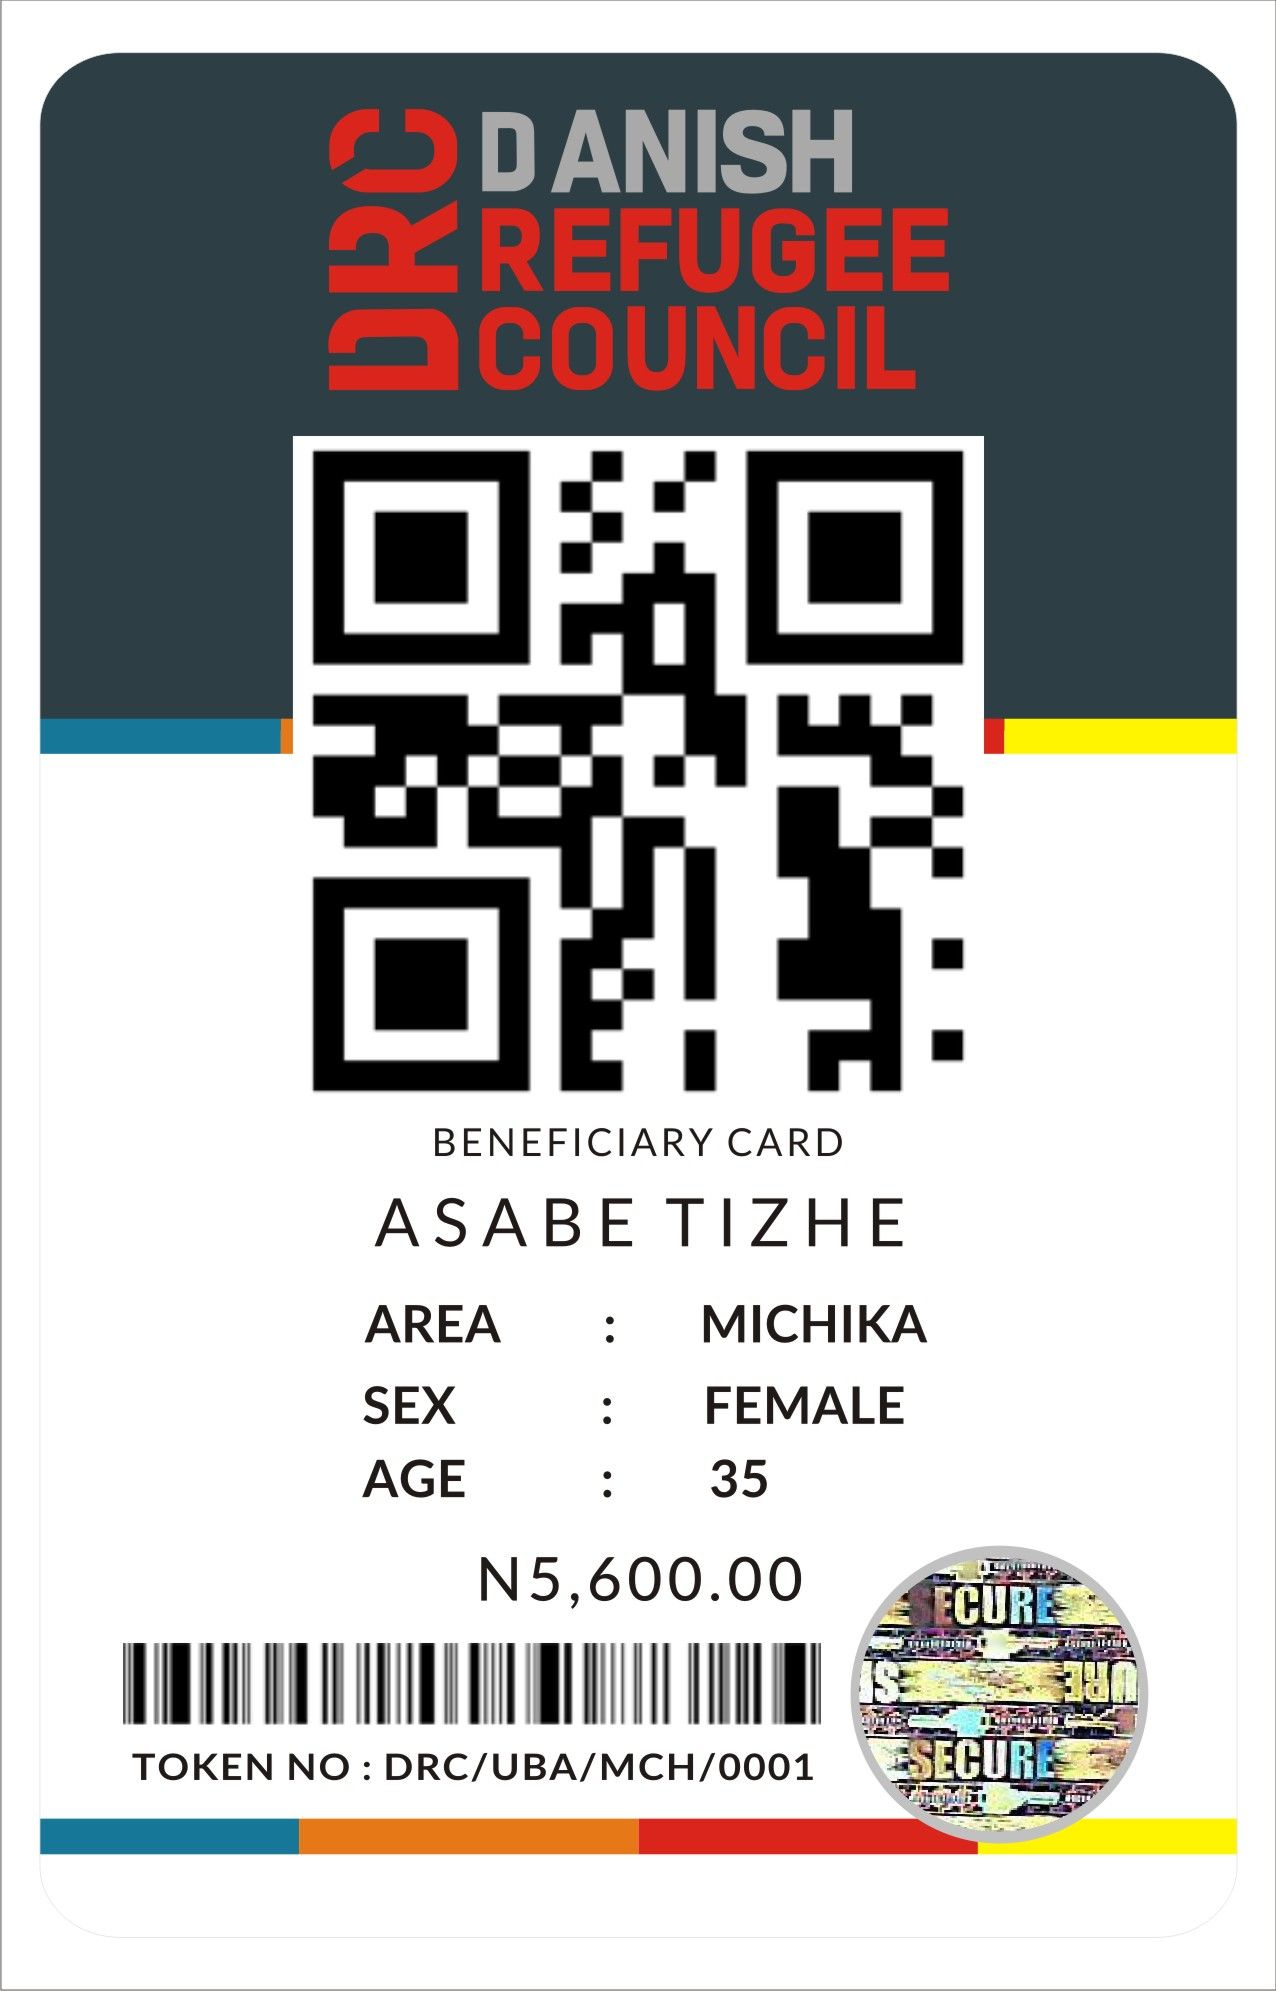 CONTACT CHINEDU ON 09022536974 TO PRINT AUTHENTICATION LABELS FOR YOUR PRODUCTS AND DOCUMENTS